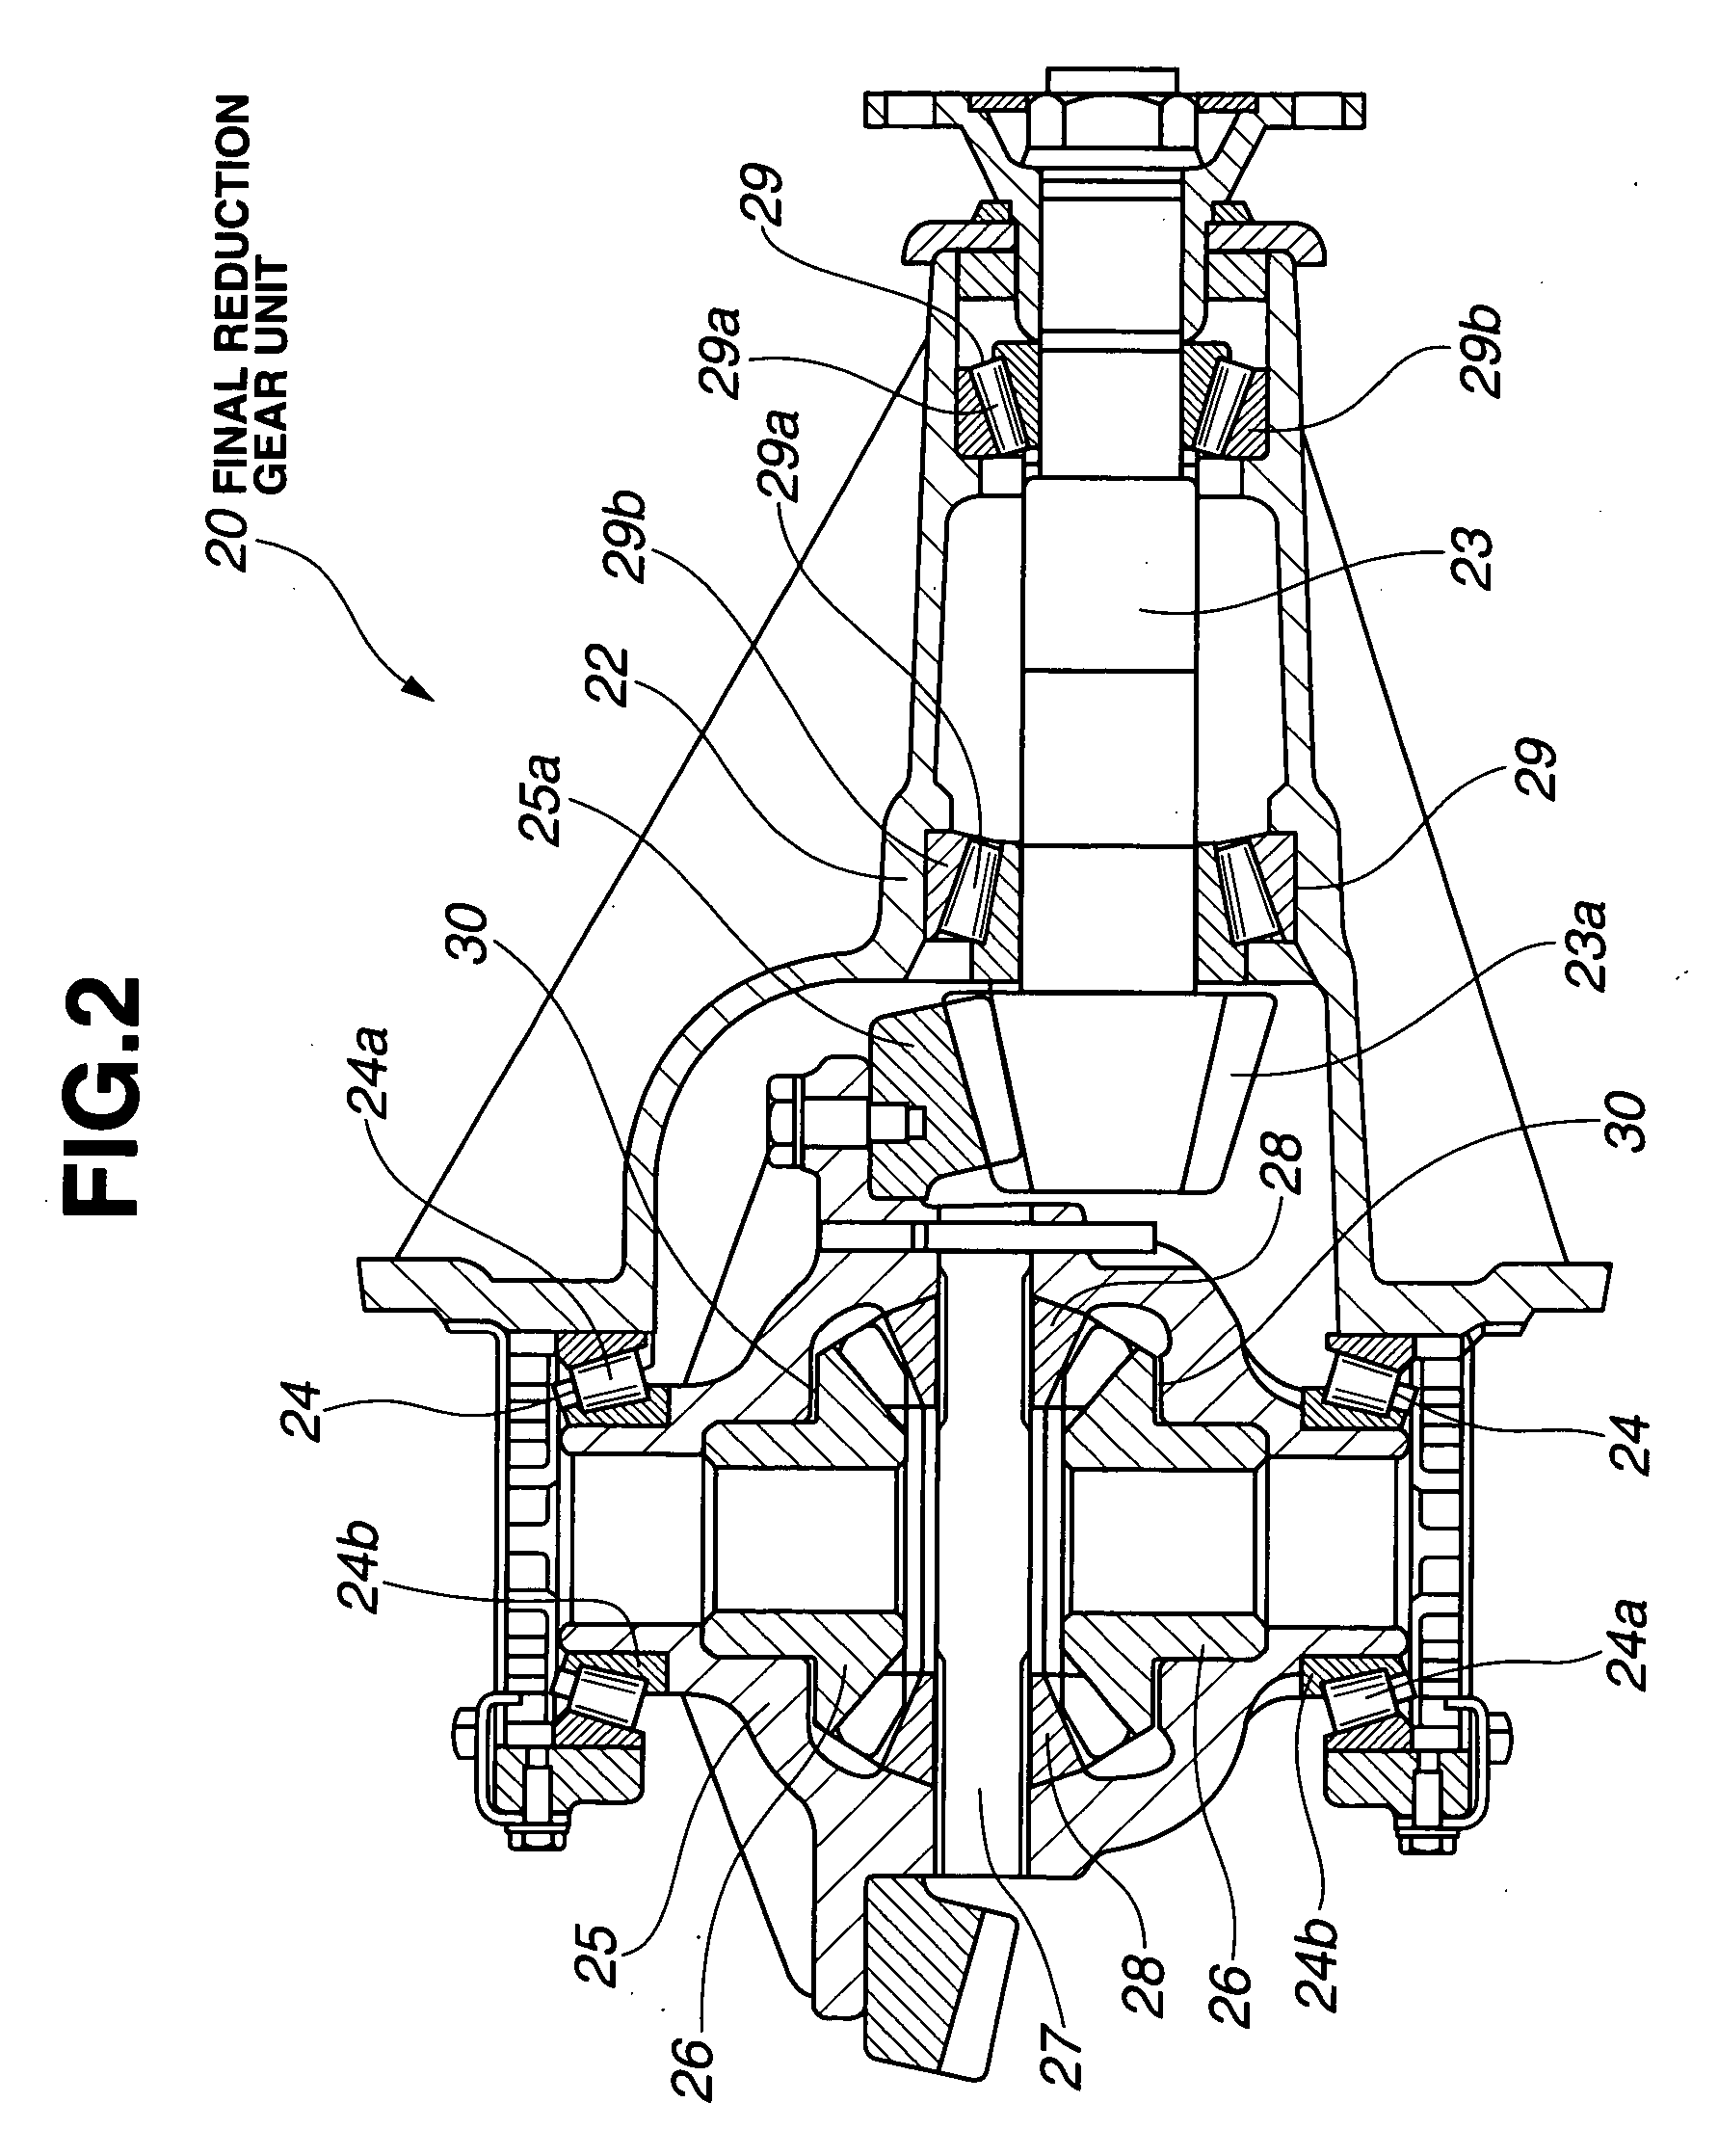 Low-friction sliding mechanism, low-friction agent composition and method of friction reduction